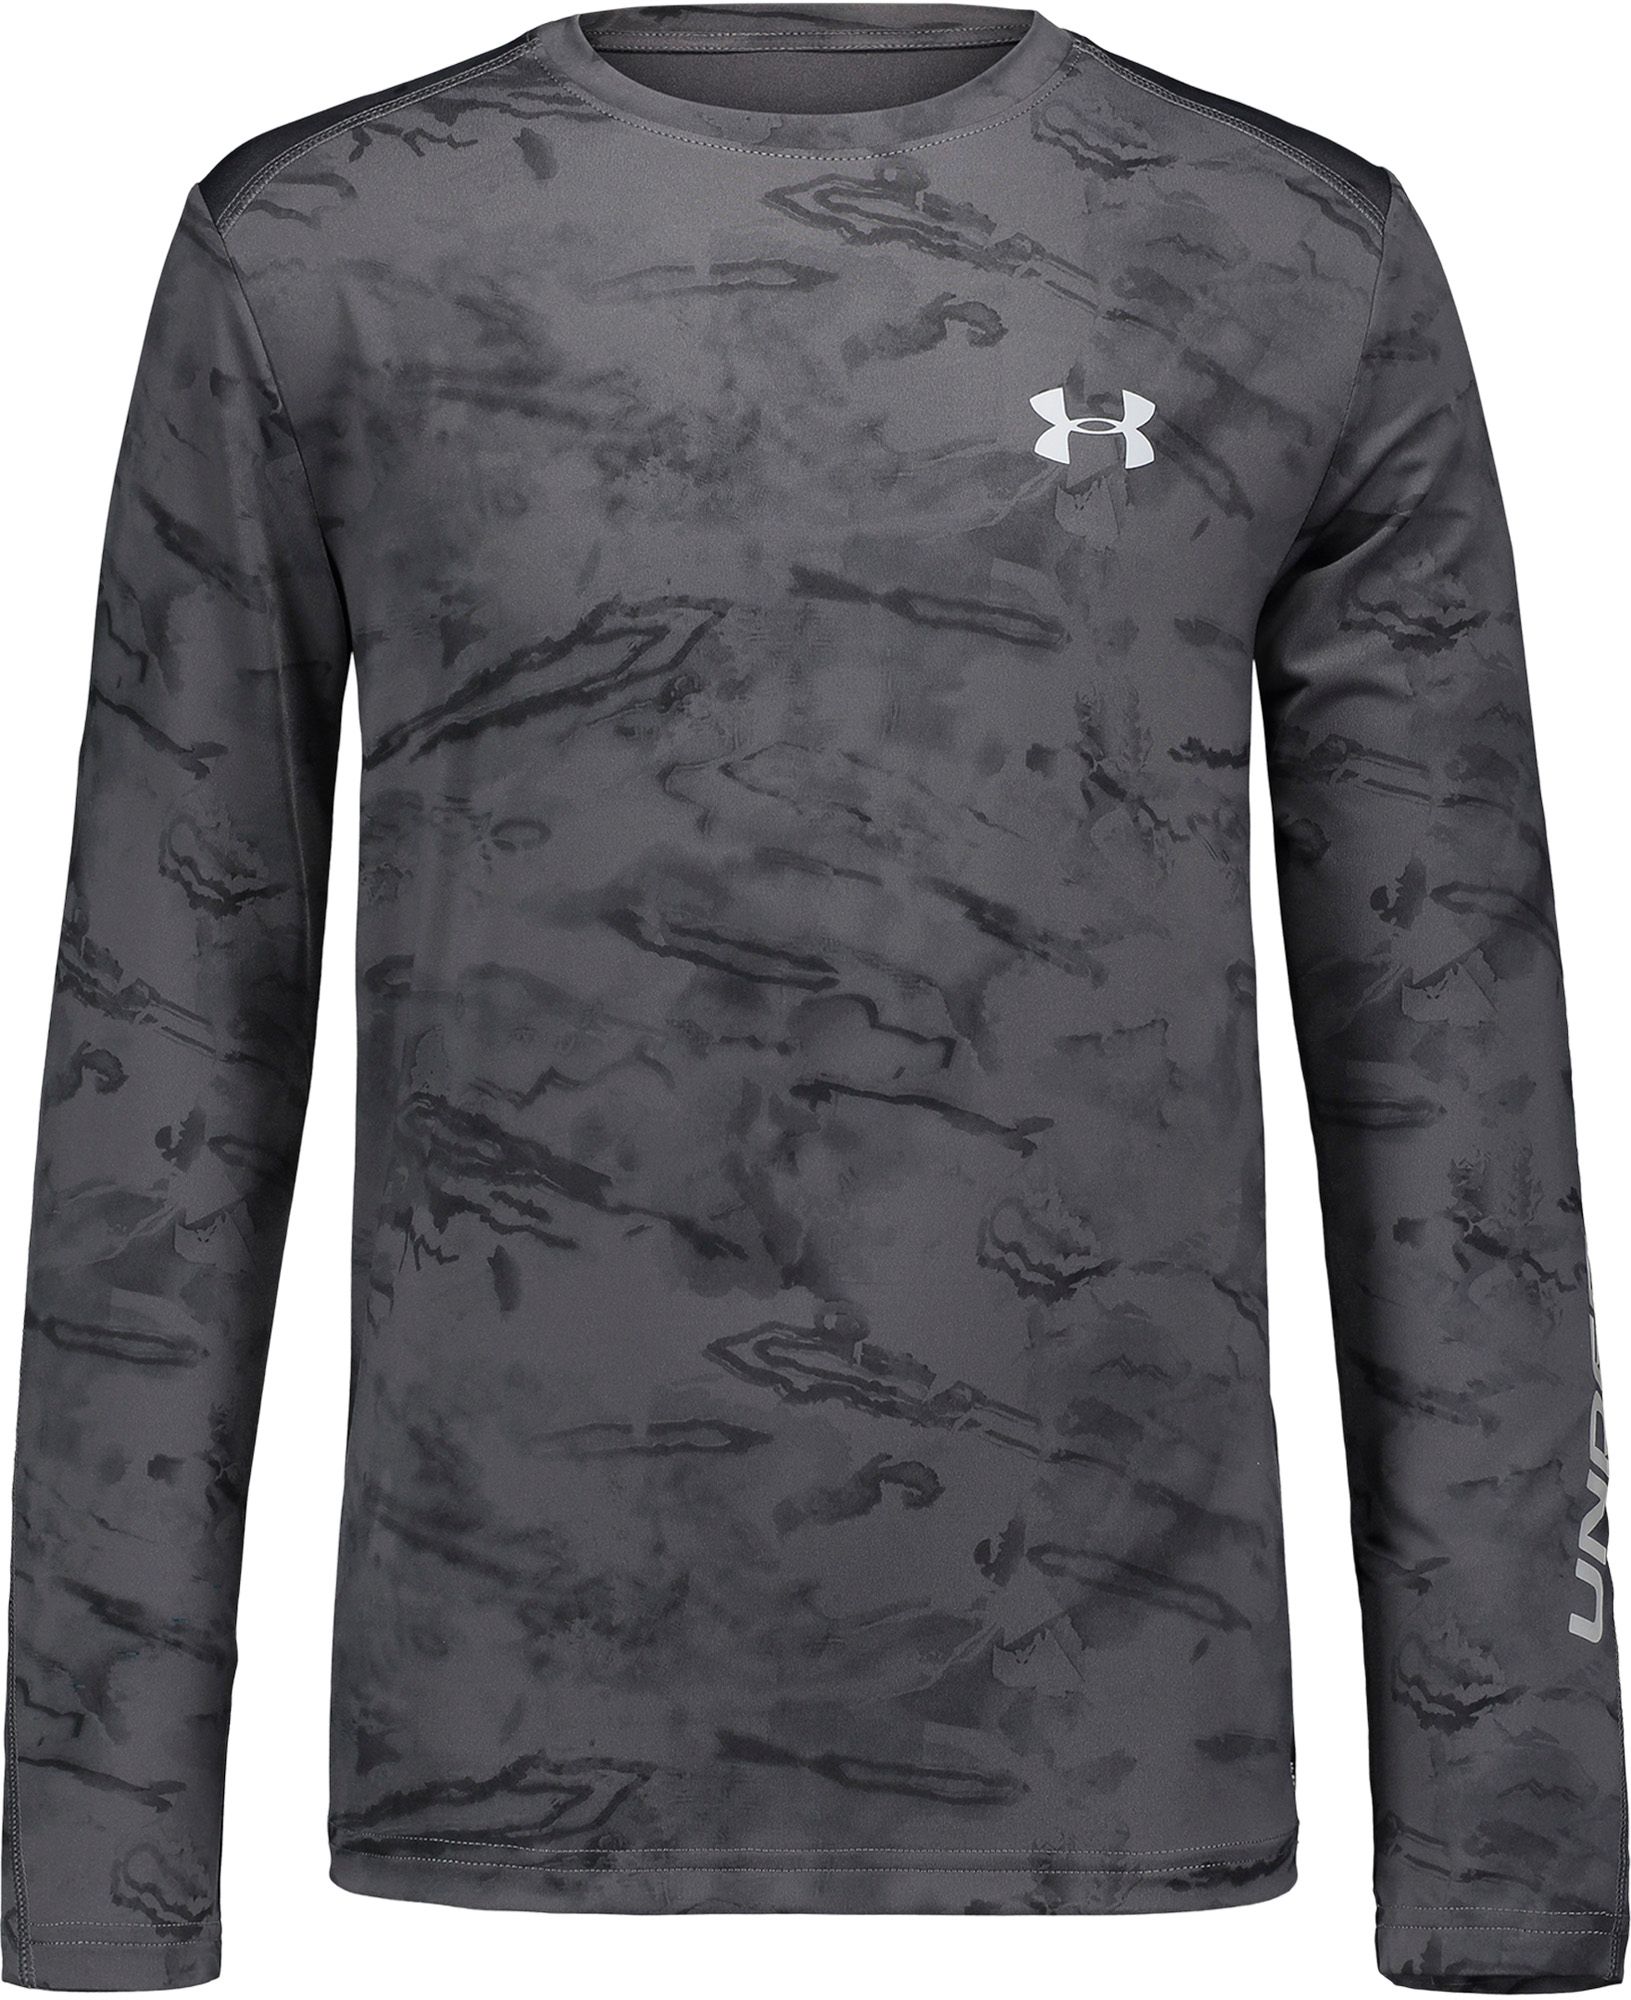 youth under armour fishing shirts